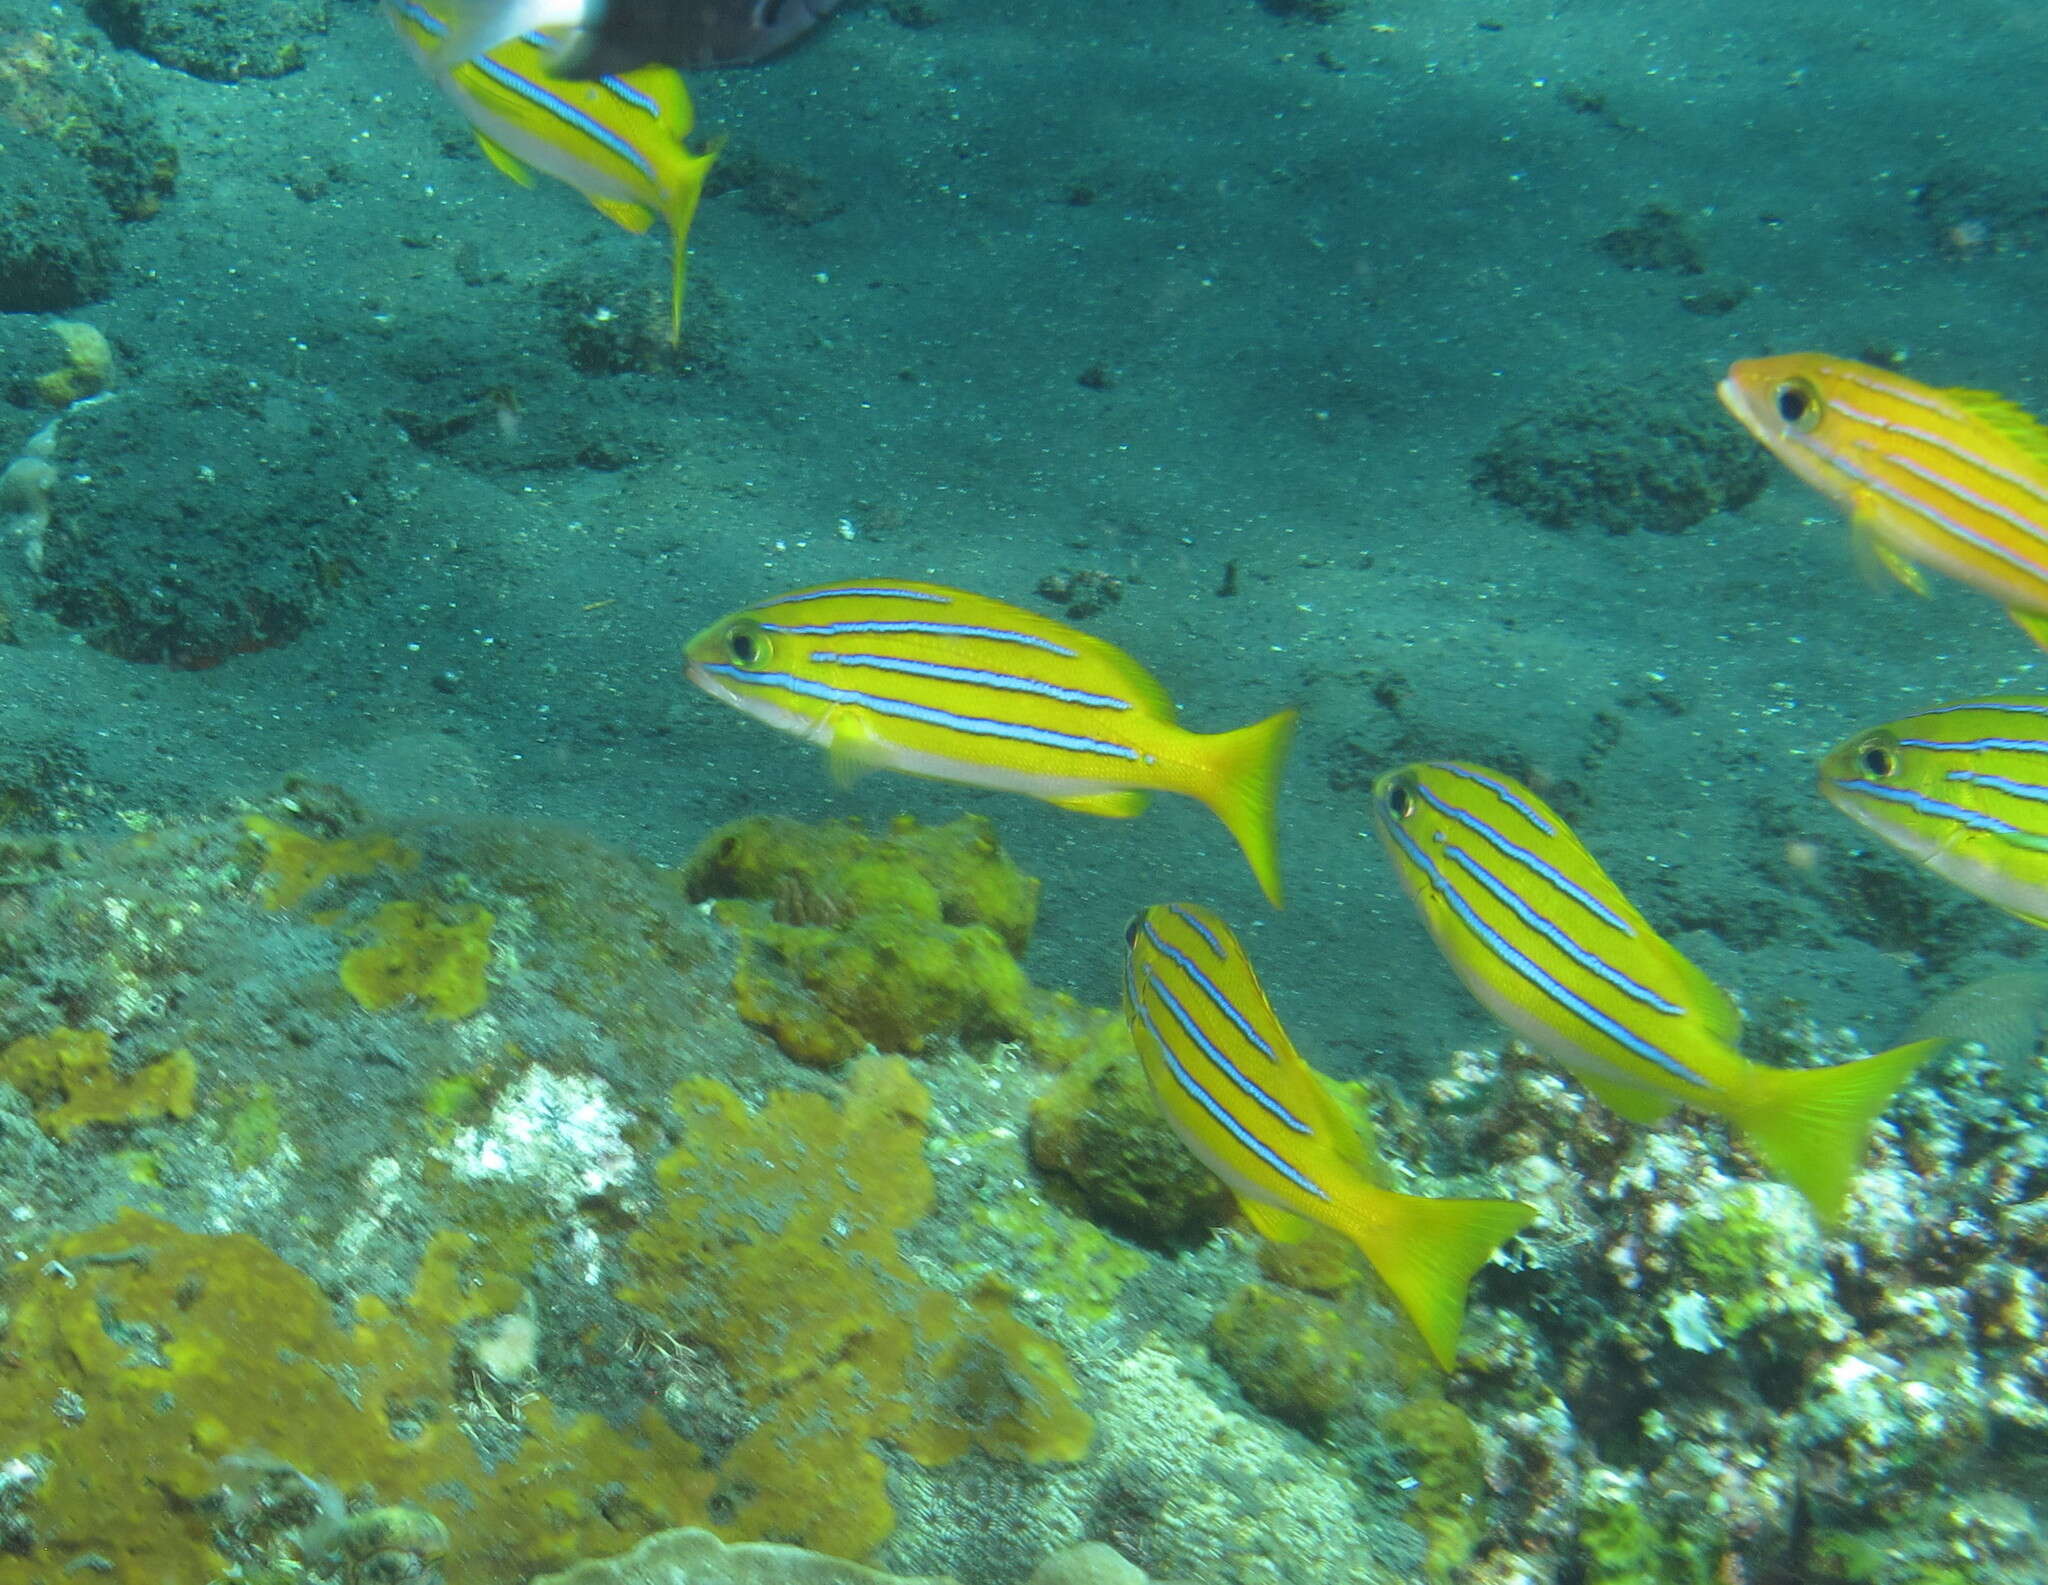 Image of Bengal snapper